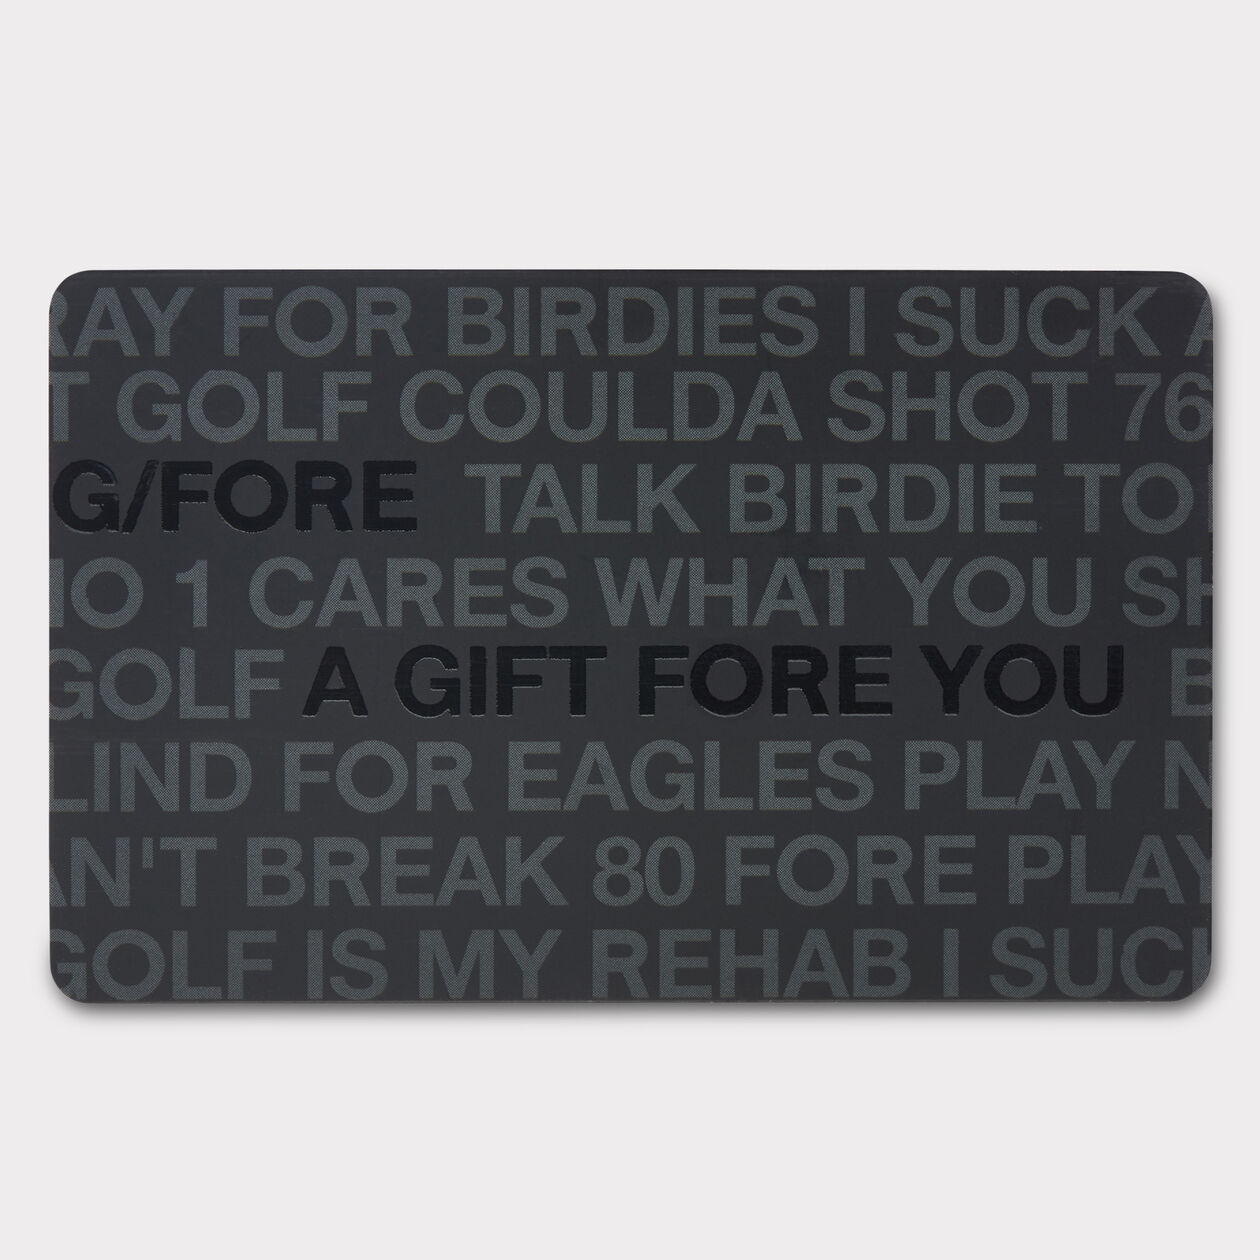 G/FORE Gift Card